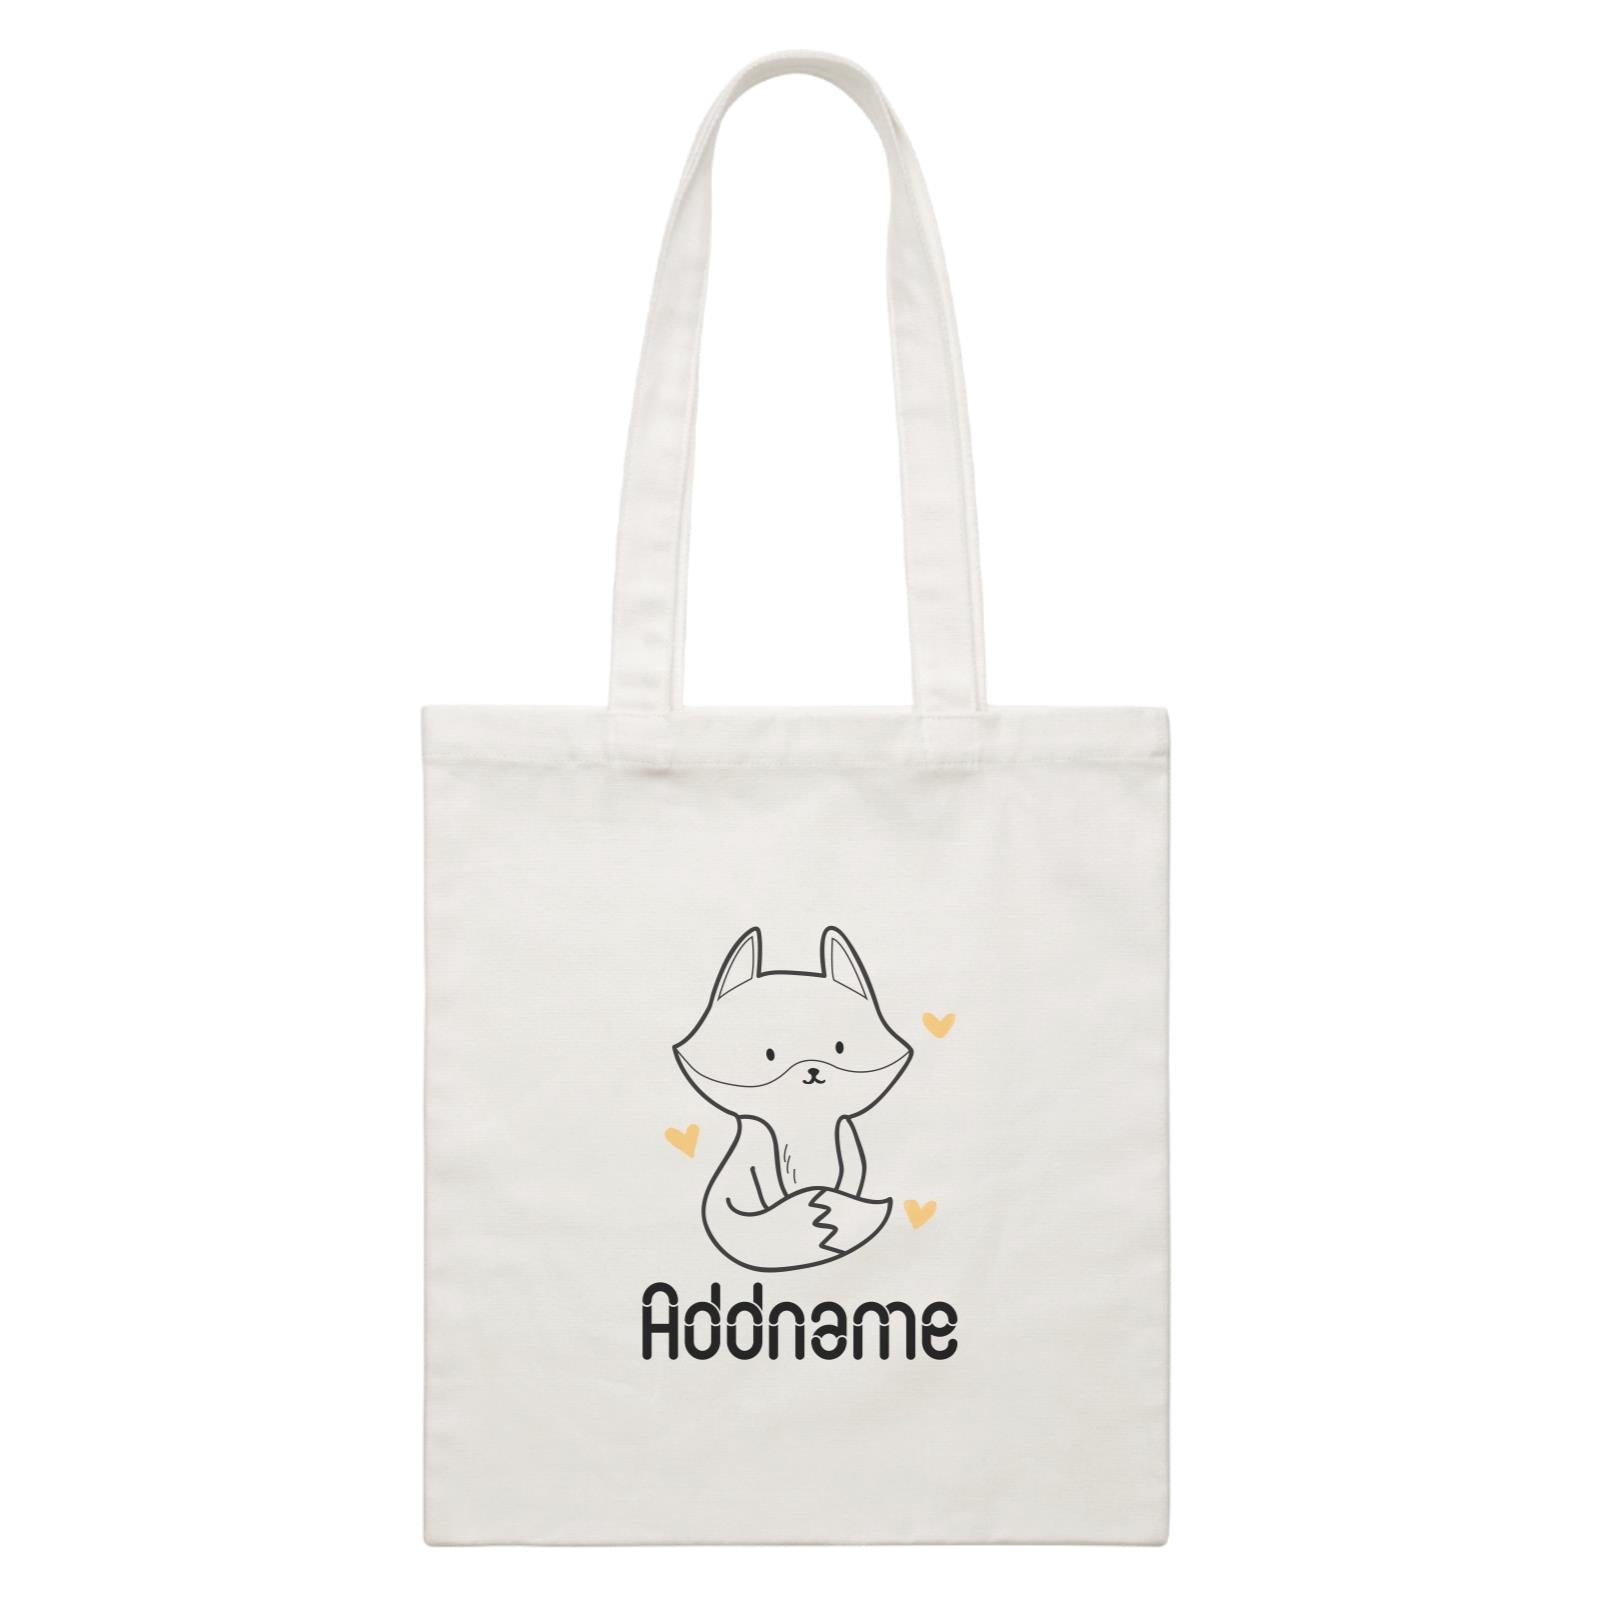 Coloring Outline Cute Hand Drawn Animals Fox Fox Addname White White Canvas Bag